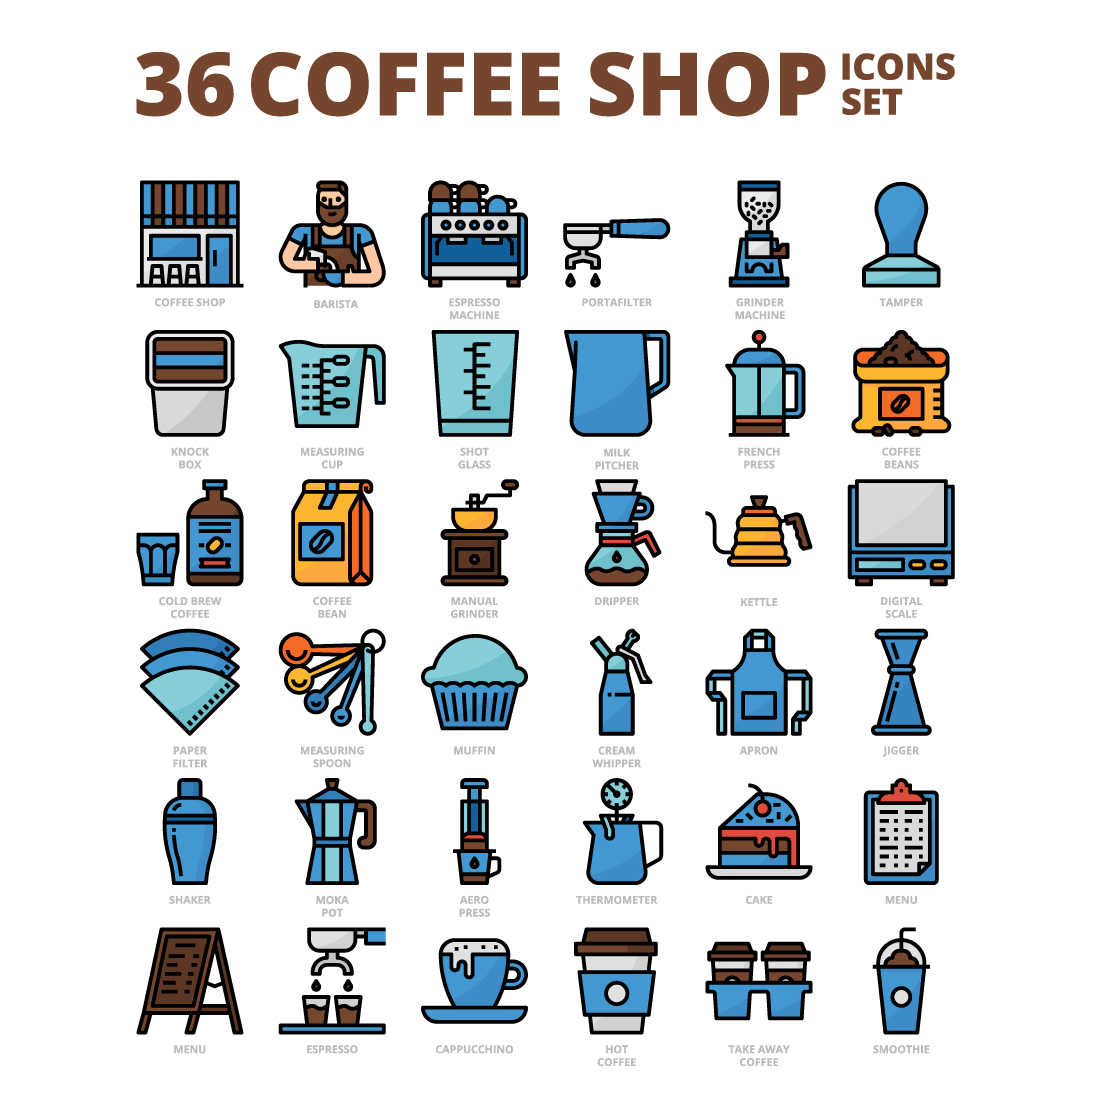 36 Coffee Shop Icons Set x 4 Styles cover image.